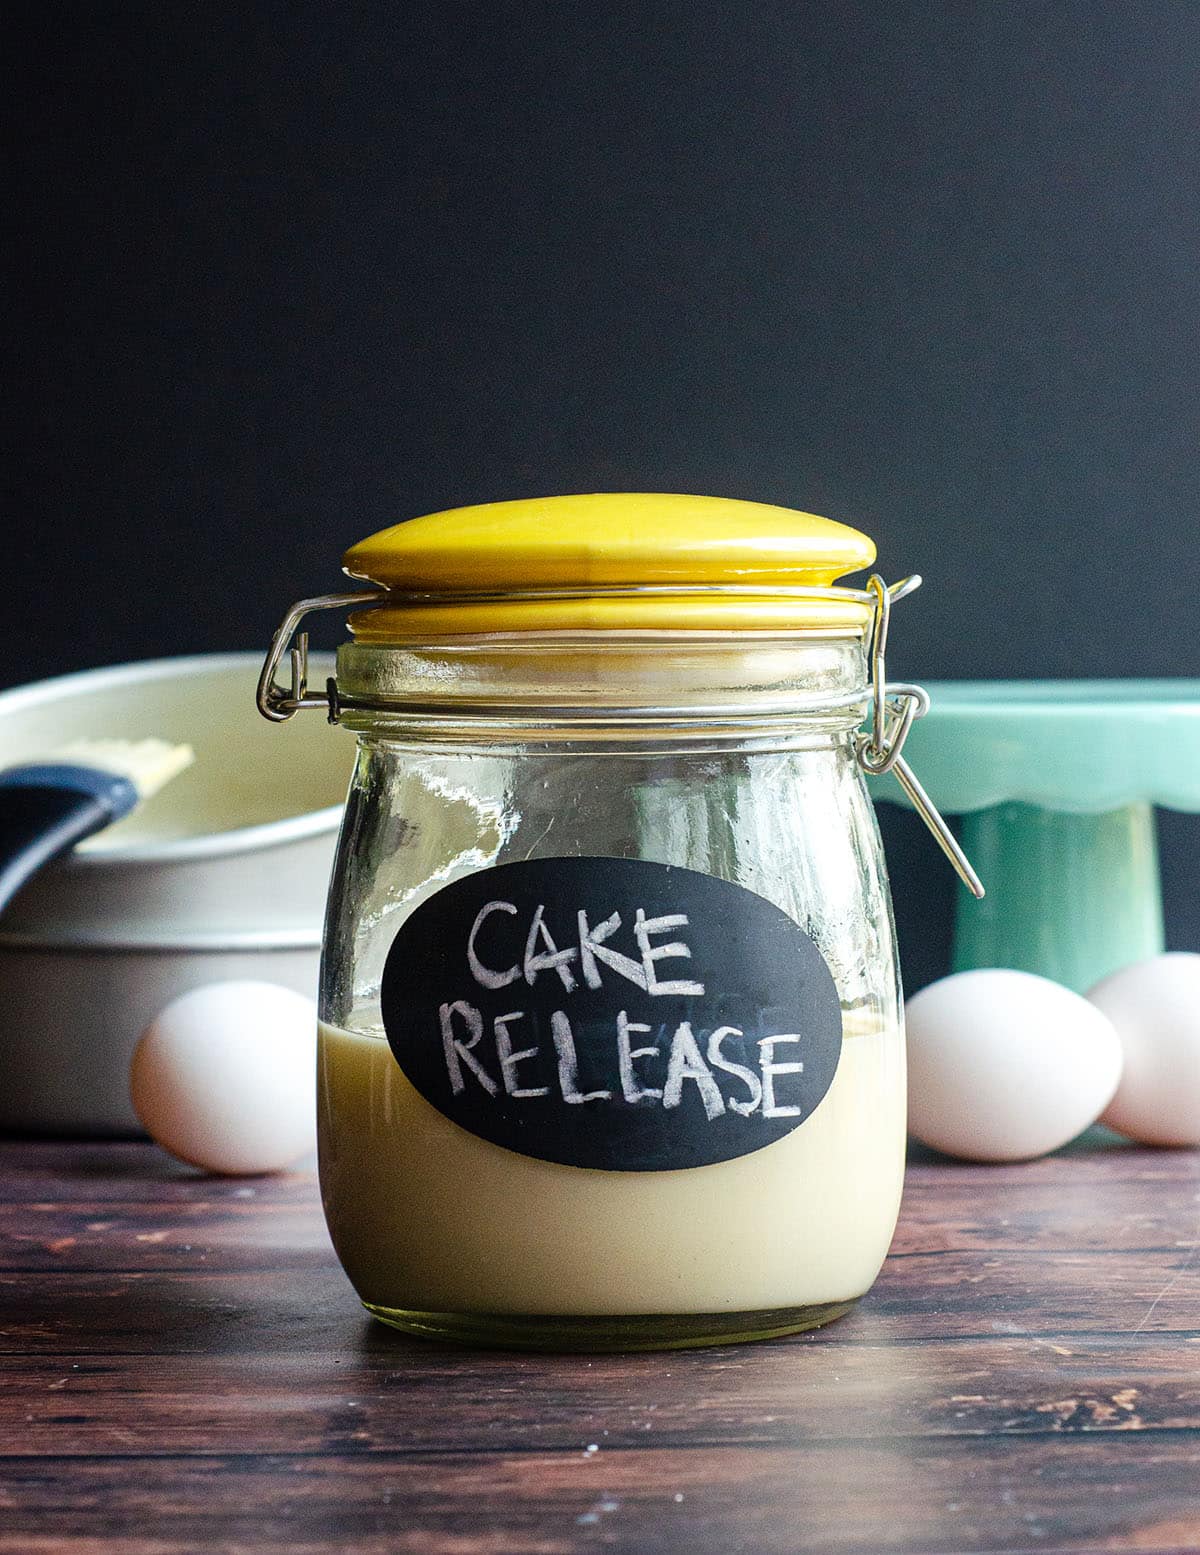 homemade cake release in a jar with a yellow lid